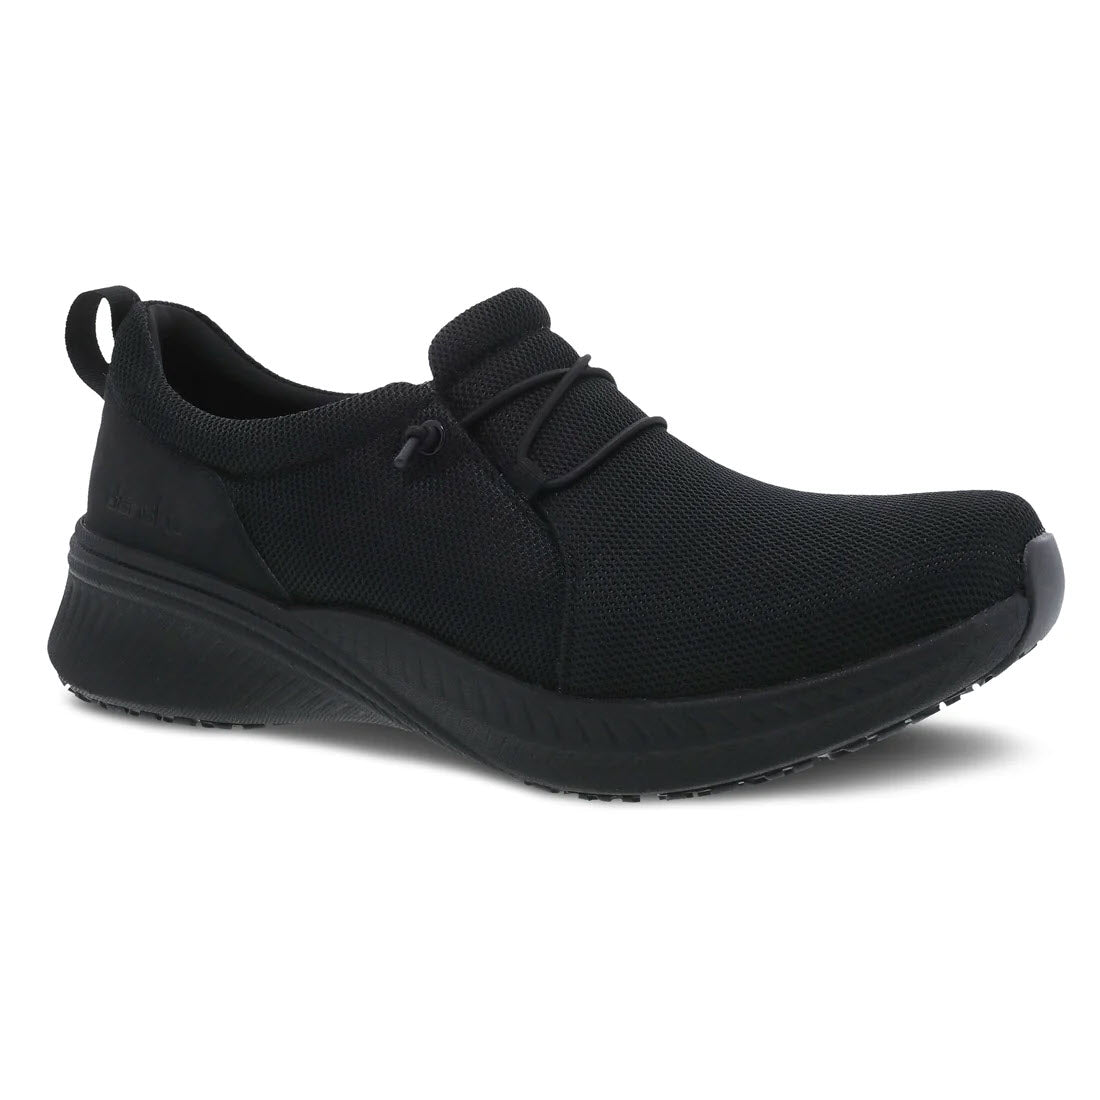 A single Dansko Marlee Black Mesh athletic shoe with a slip-on design, featuring a toggle lacing system and a slip-resistant rubber outsole.